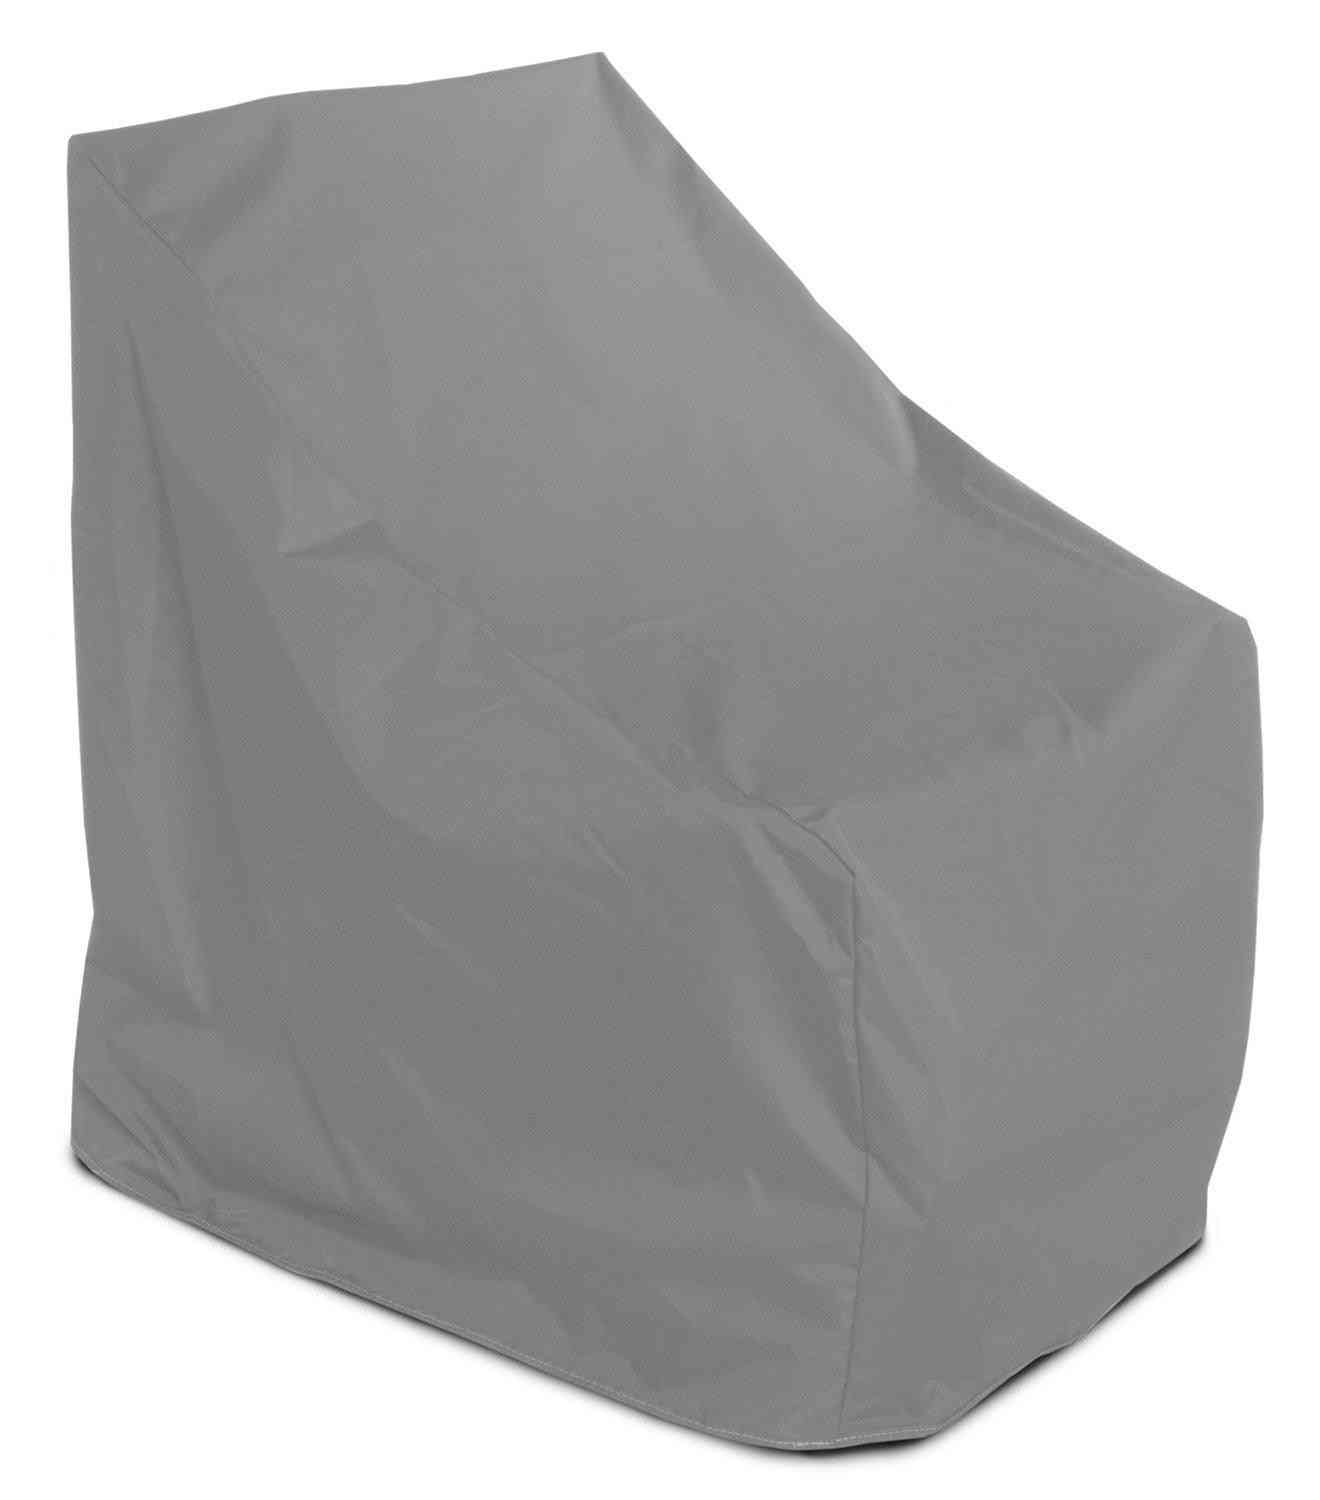 Dust Cover Storage Bag Garden Patio Furniture Protector